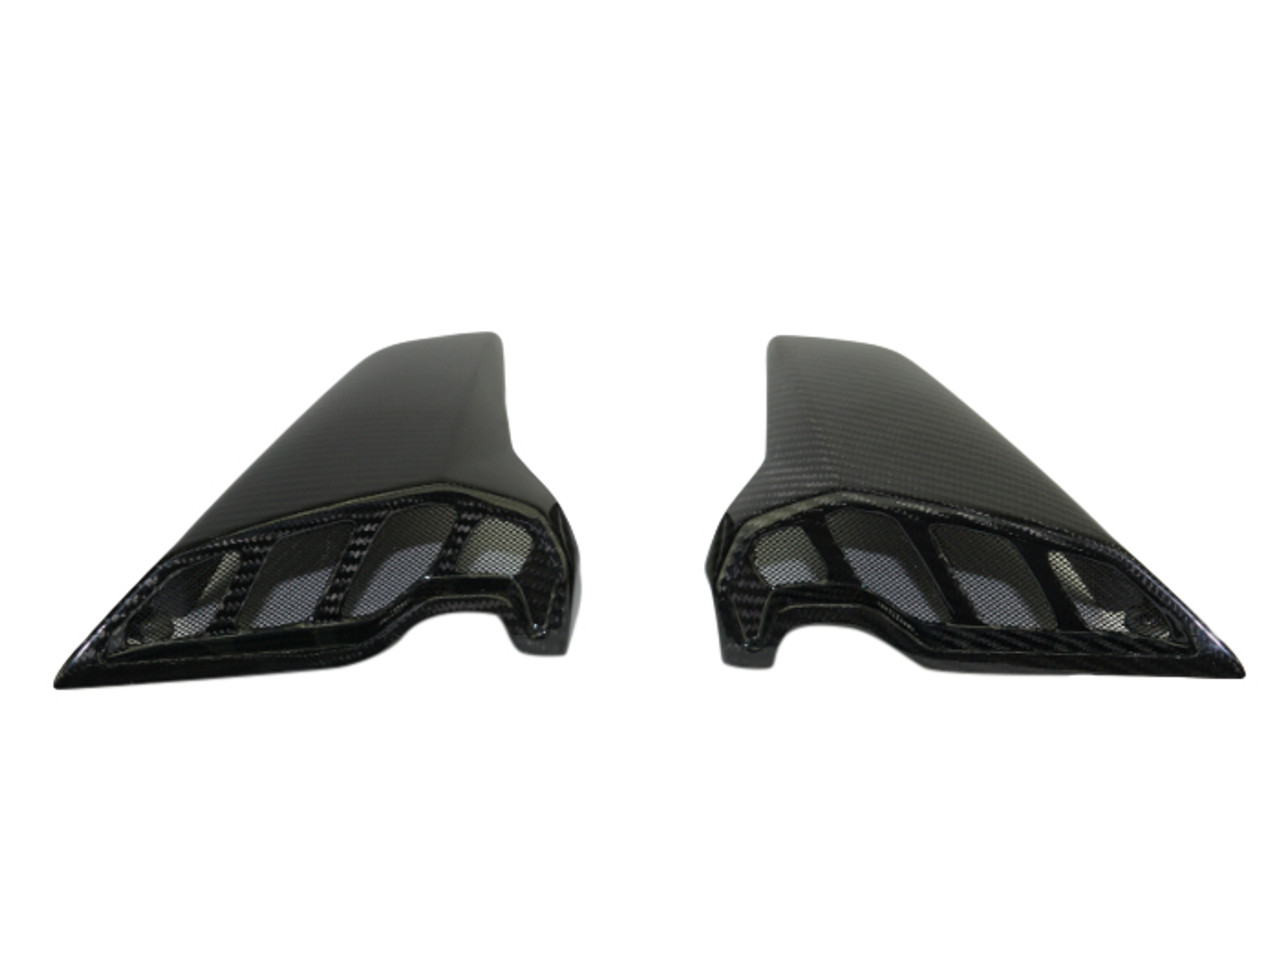 Air Intakes w/ Mesh Grills in Glossy Twill Weave Carbon Fiber for Yamaha FZ-09-MT-09 2017+